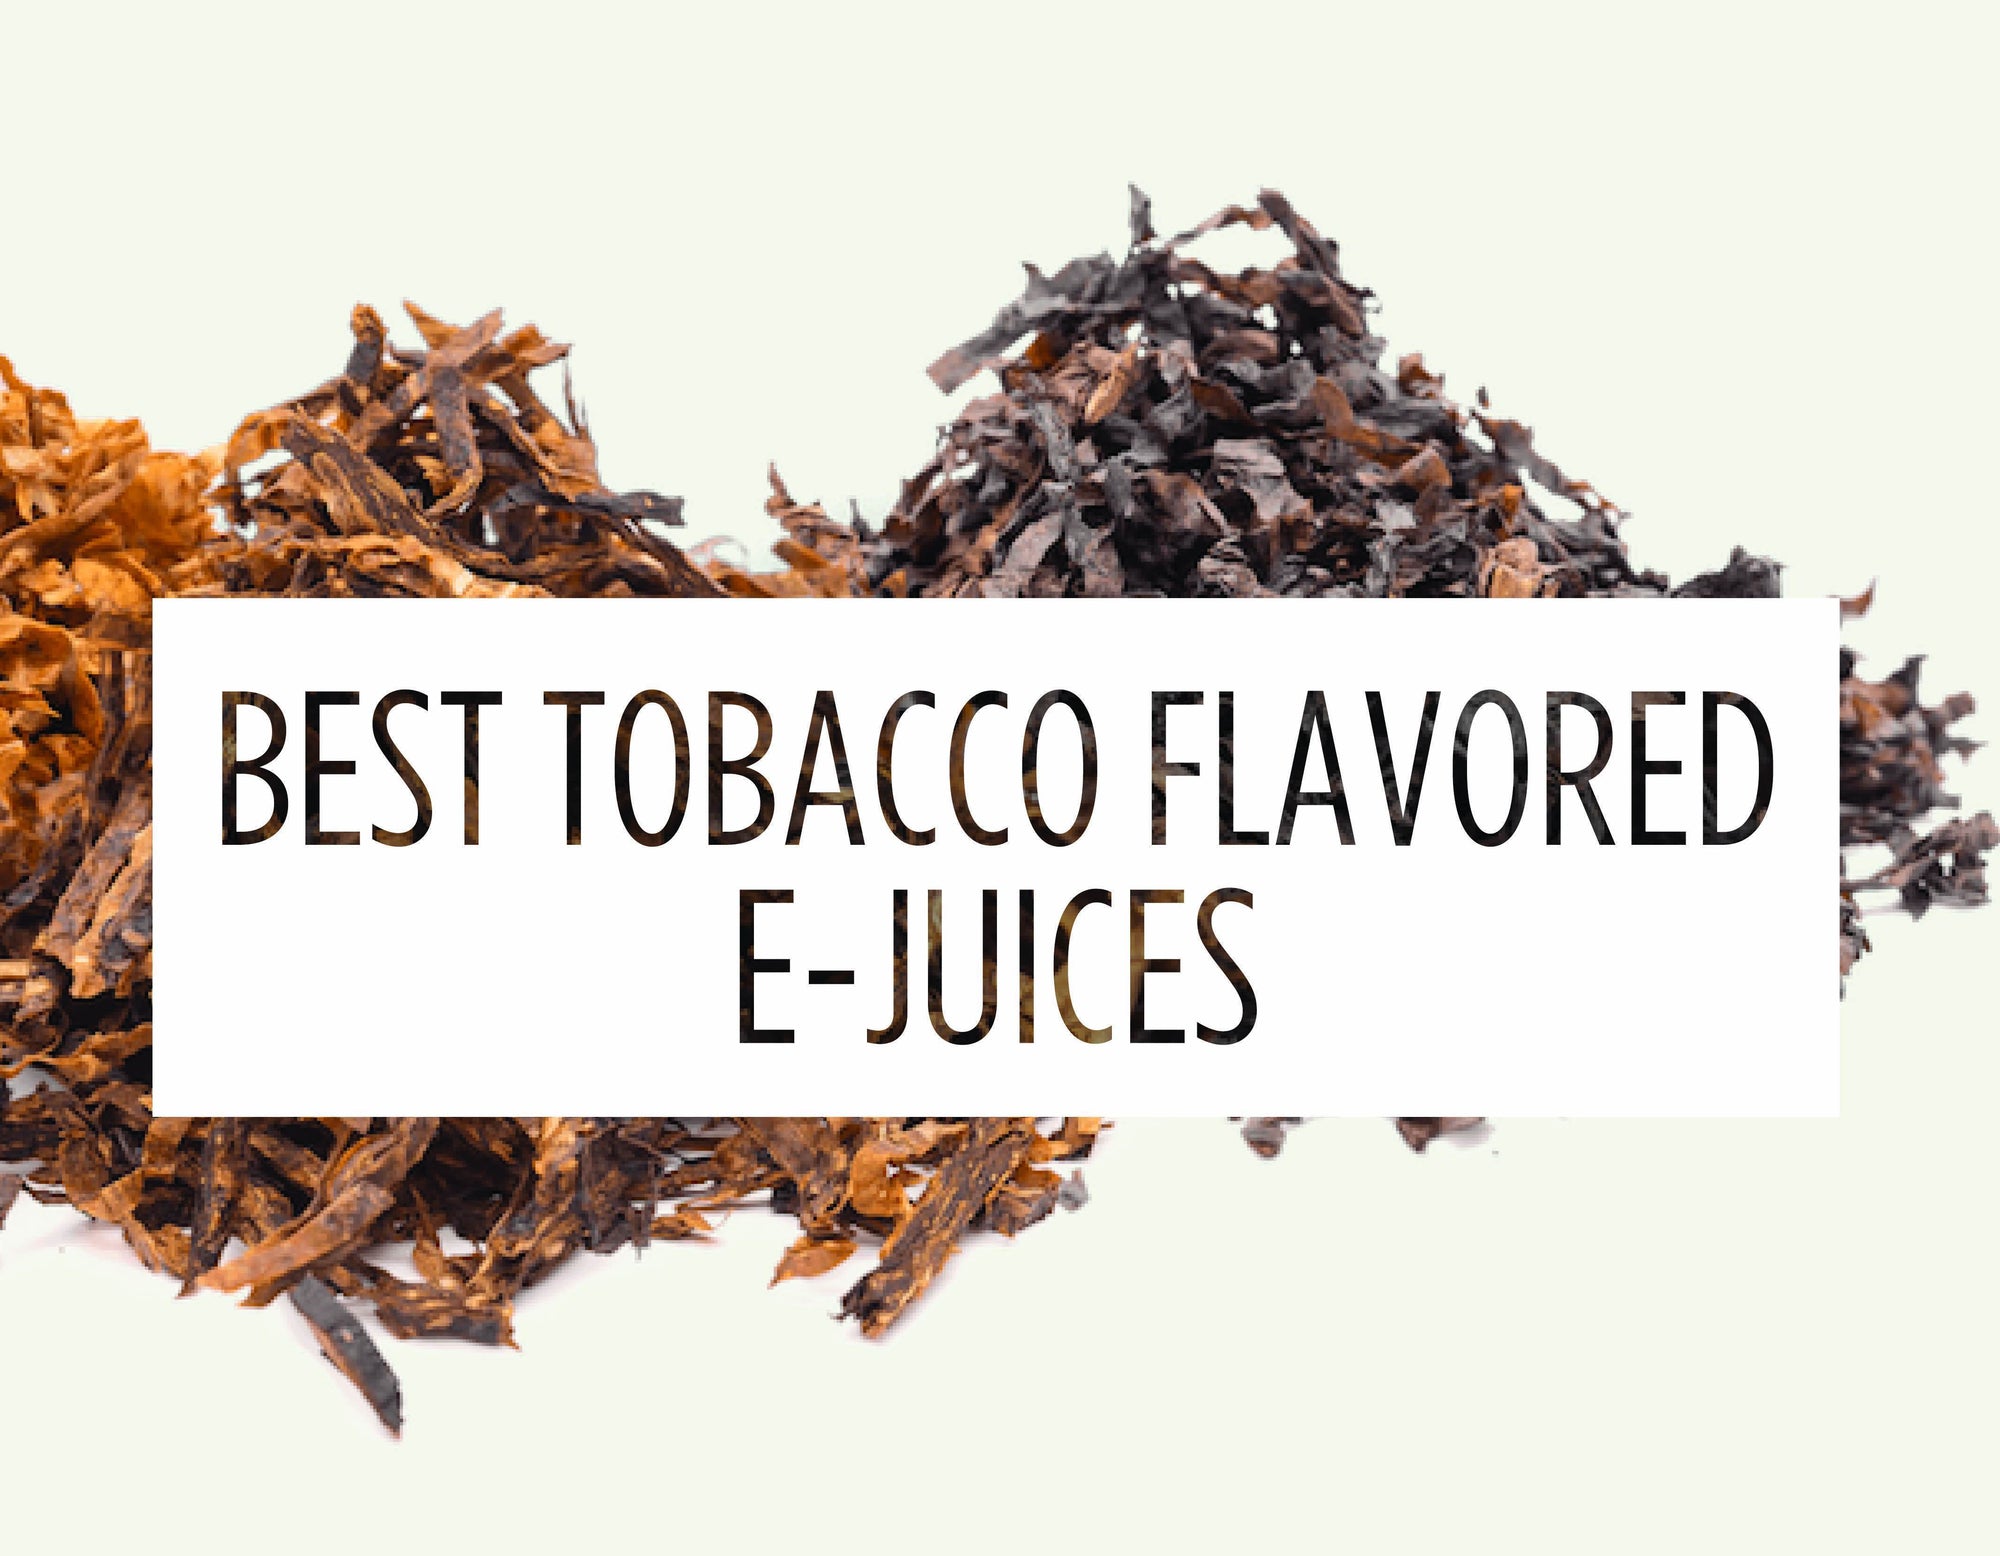 Best Tobacco Flavored E-Juices